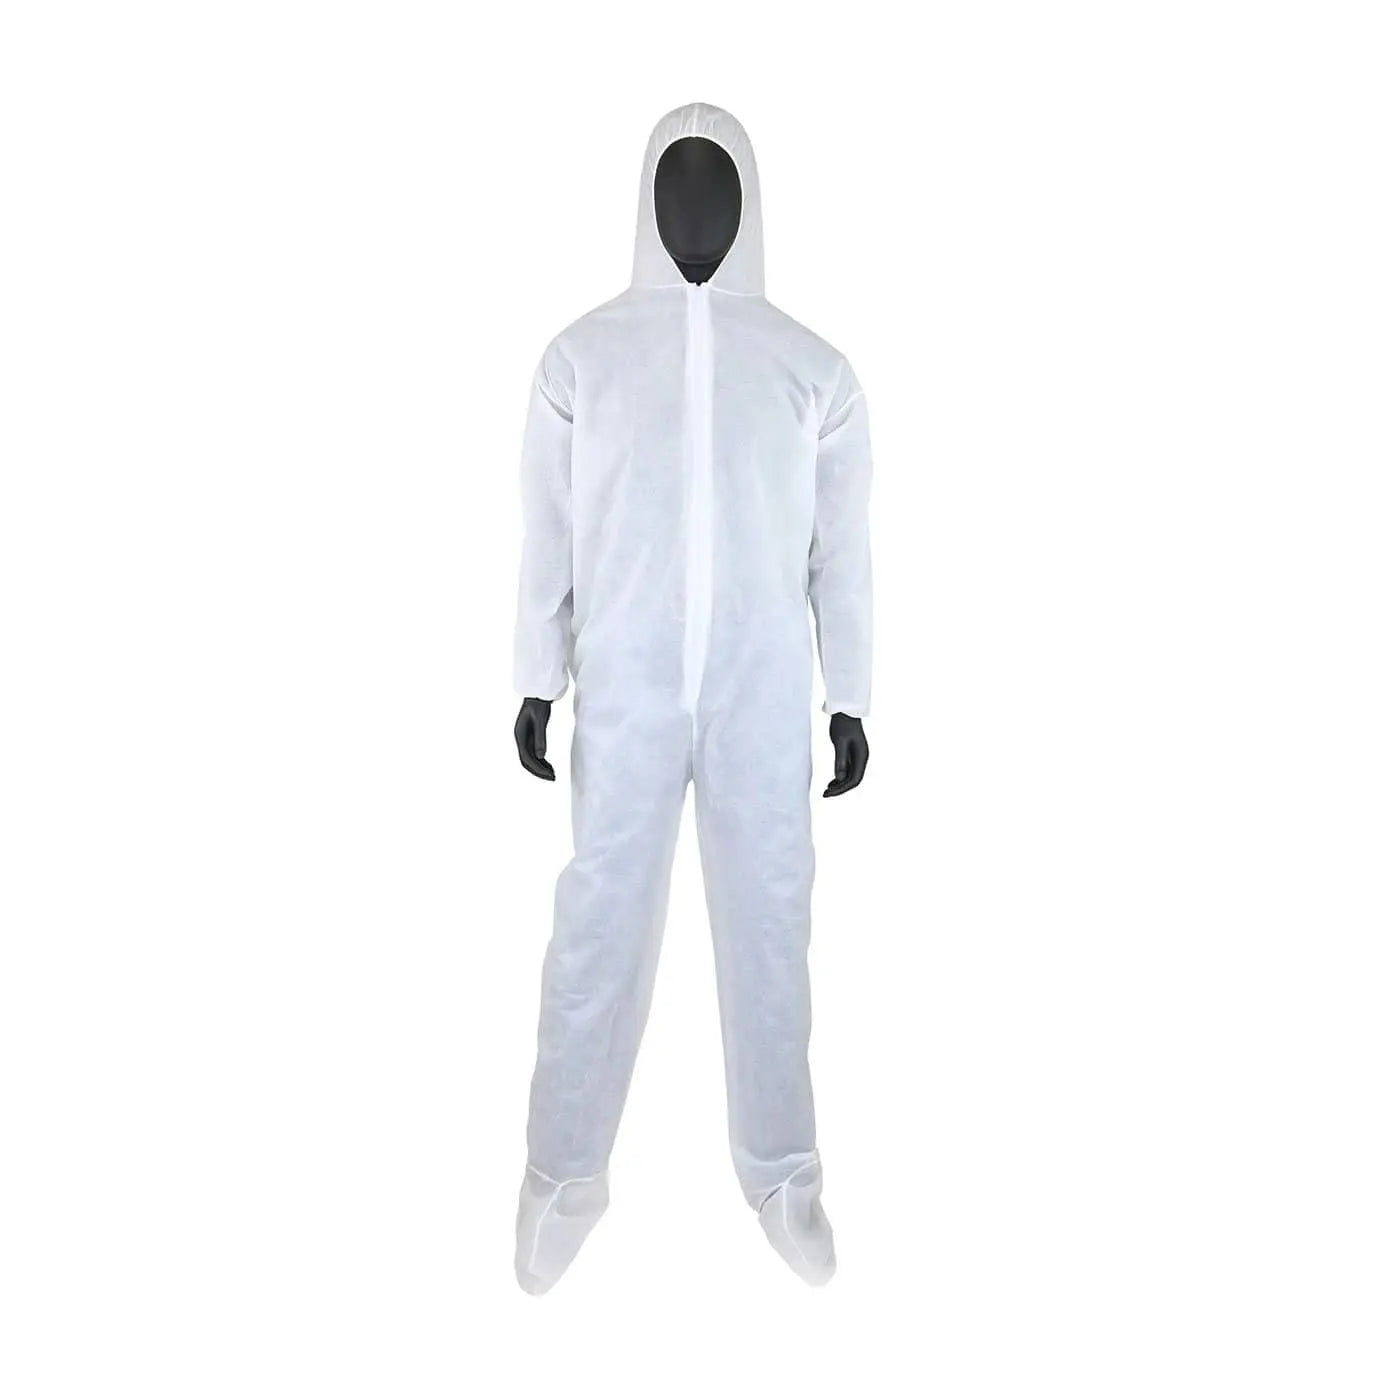 PIP - Disposable Coveralls - Elastic Cuff, Elastic Ankle Style, Polyethylene/Polypropylene Material, Zipper Front Closure, White, - Becker Safety and Supply